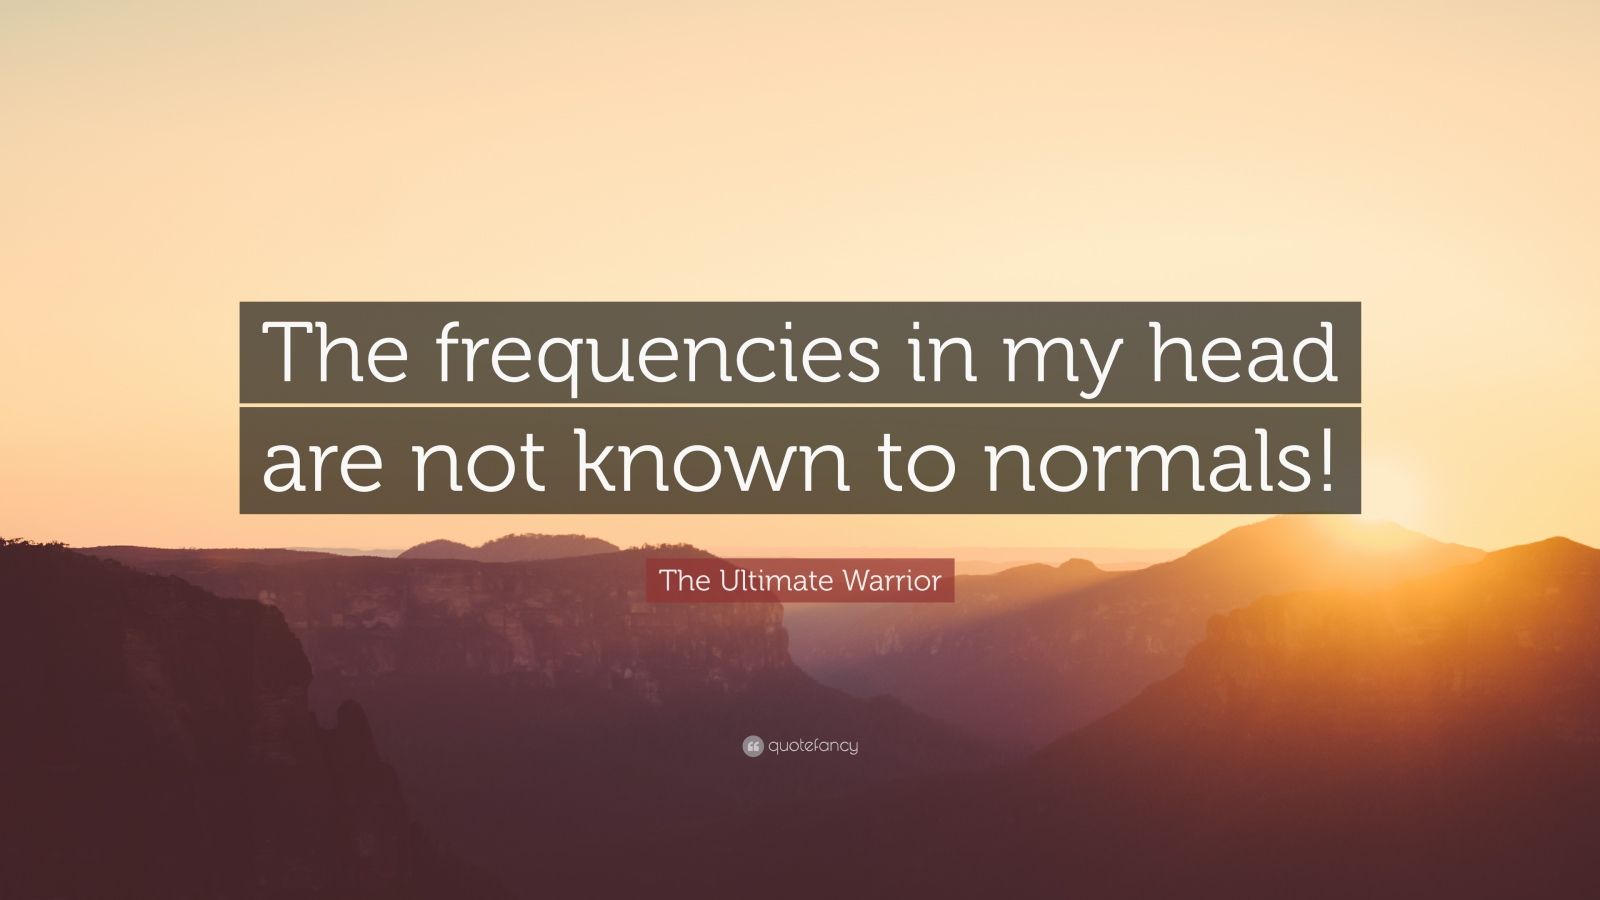 The Ultimate Warrior Quote: "The frequencies in my head are not known to normals!" (7 wallpapers ...